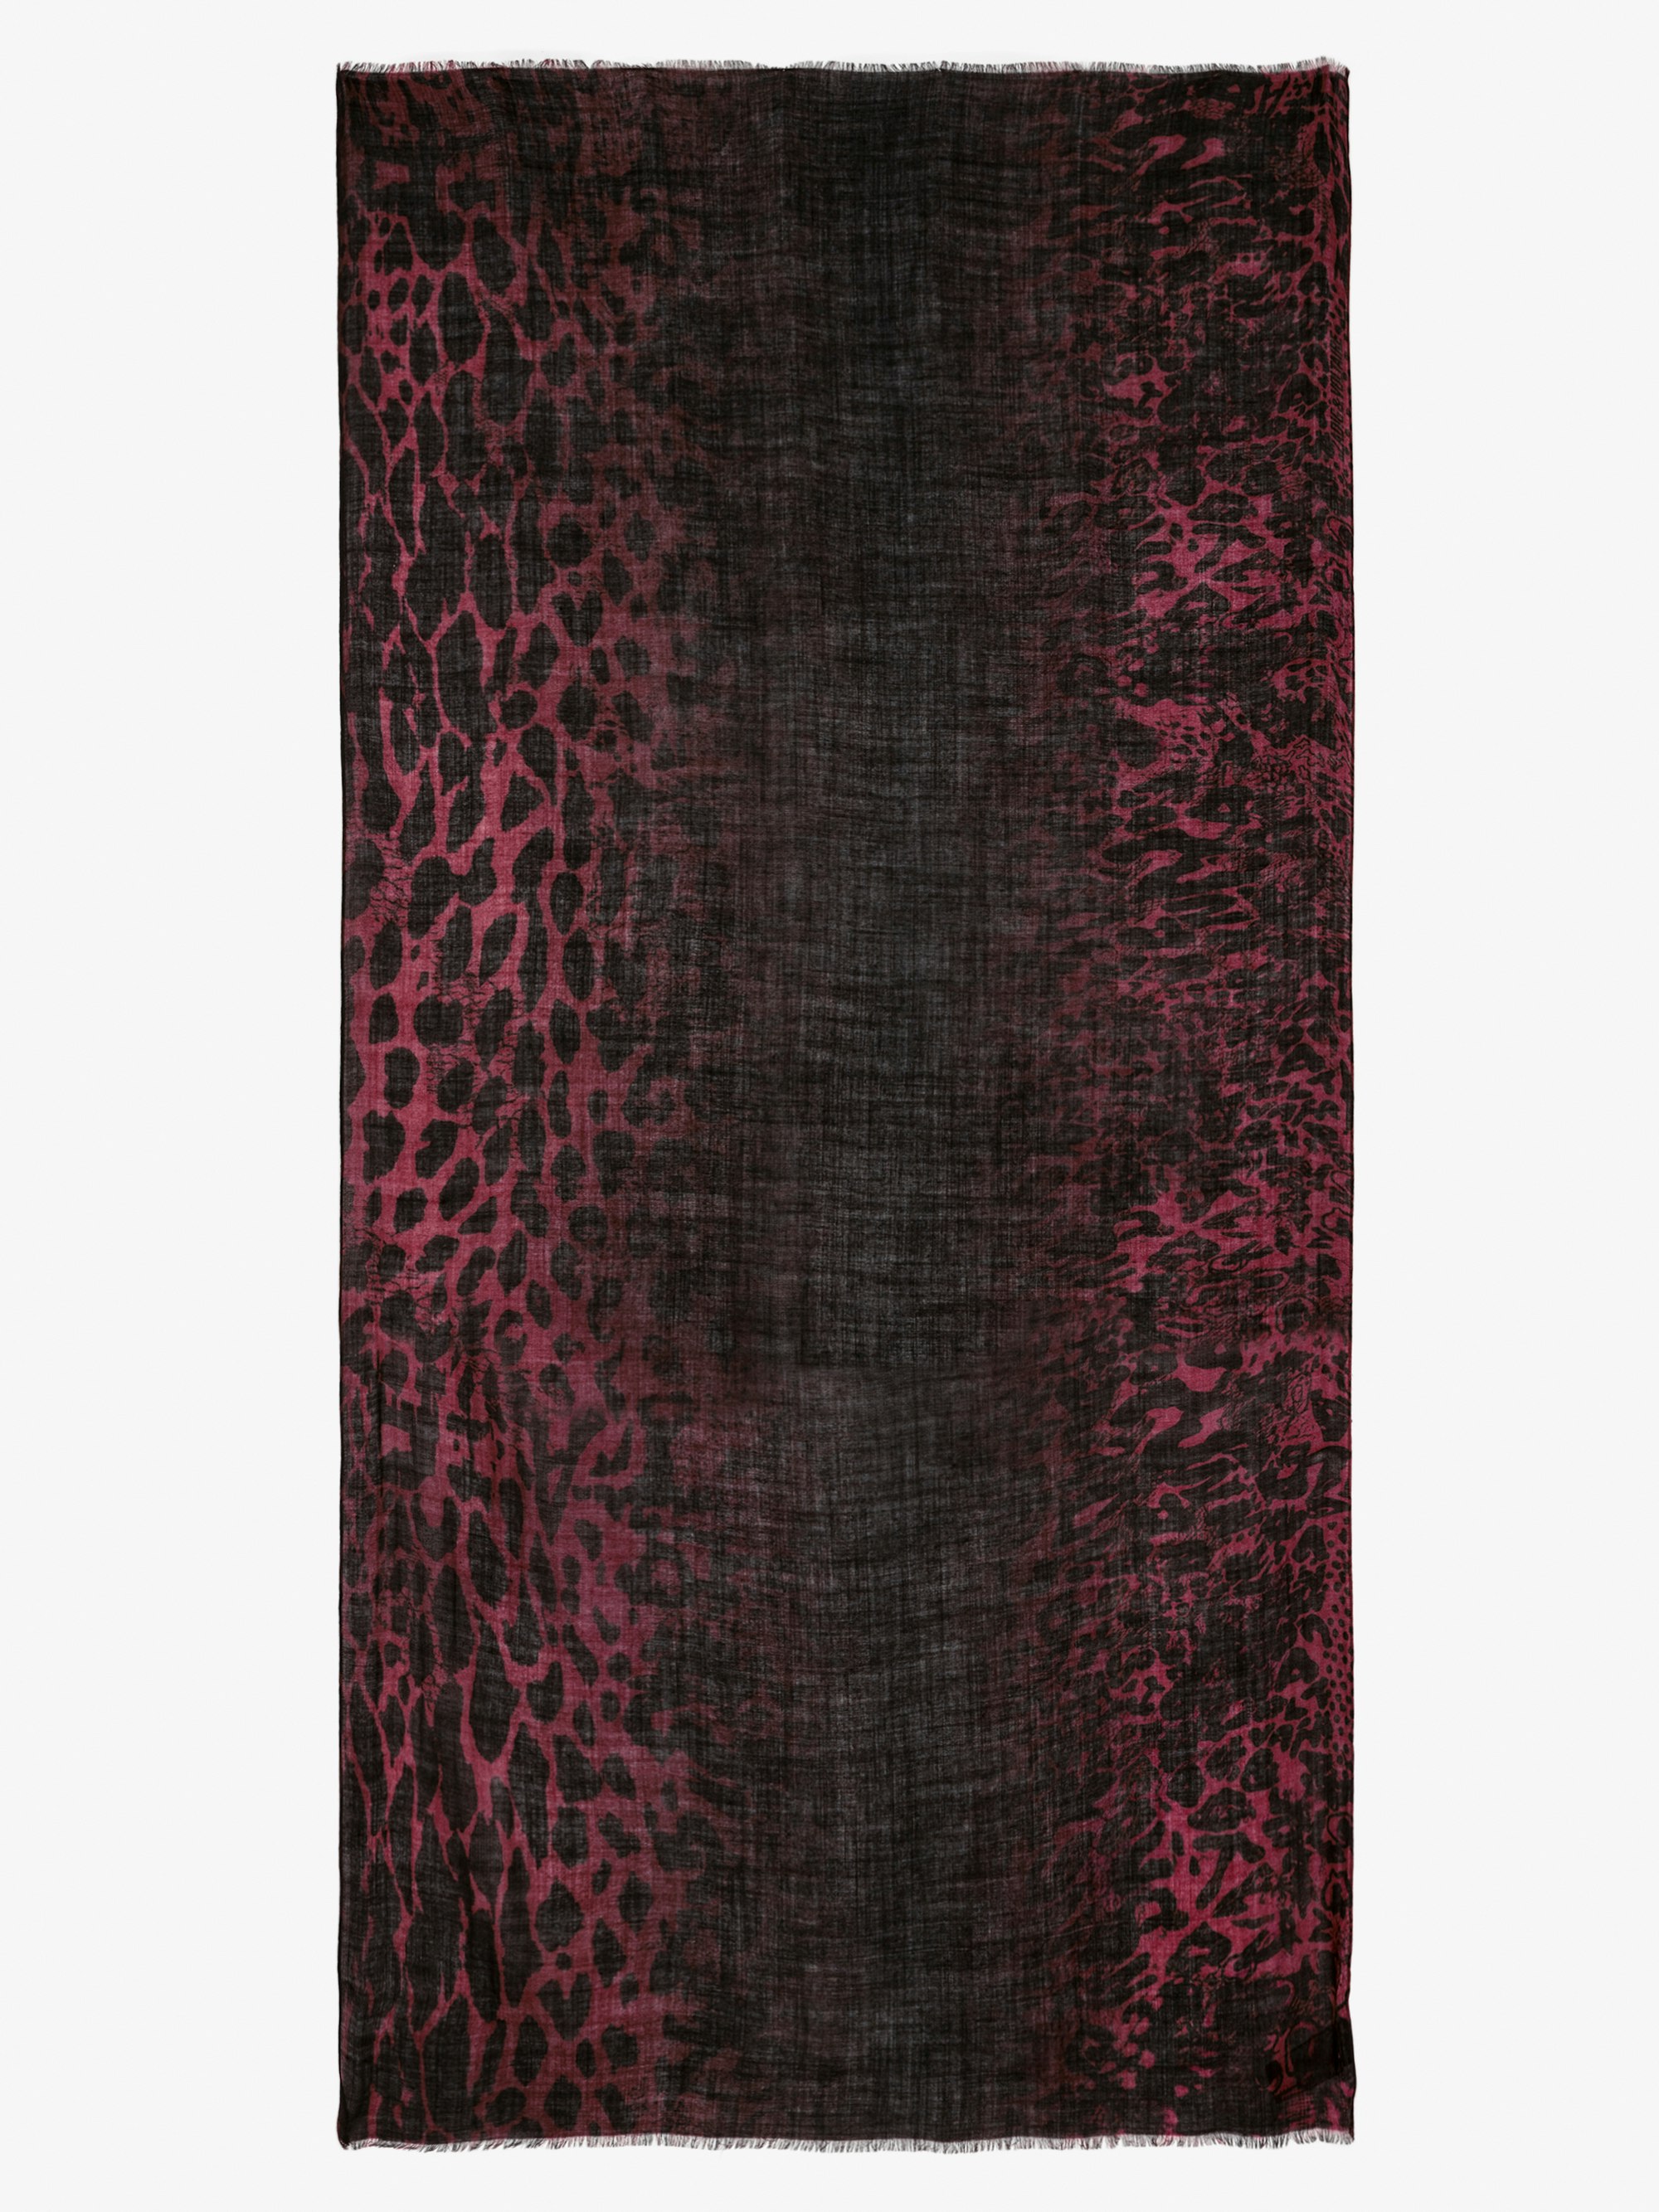 Judy Scarf - Red wool scarf with leopard print and tie & dye effect.